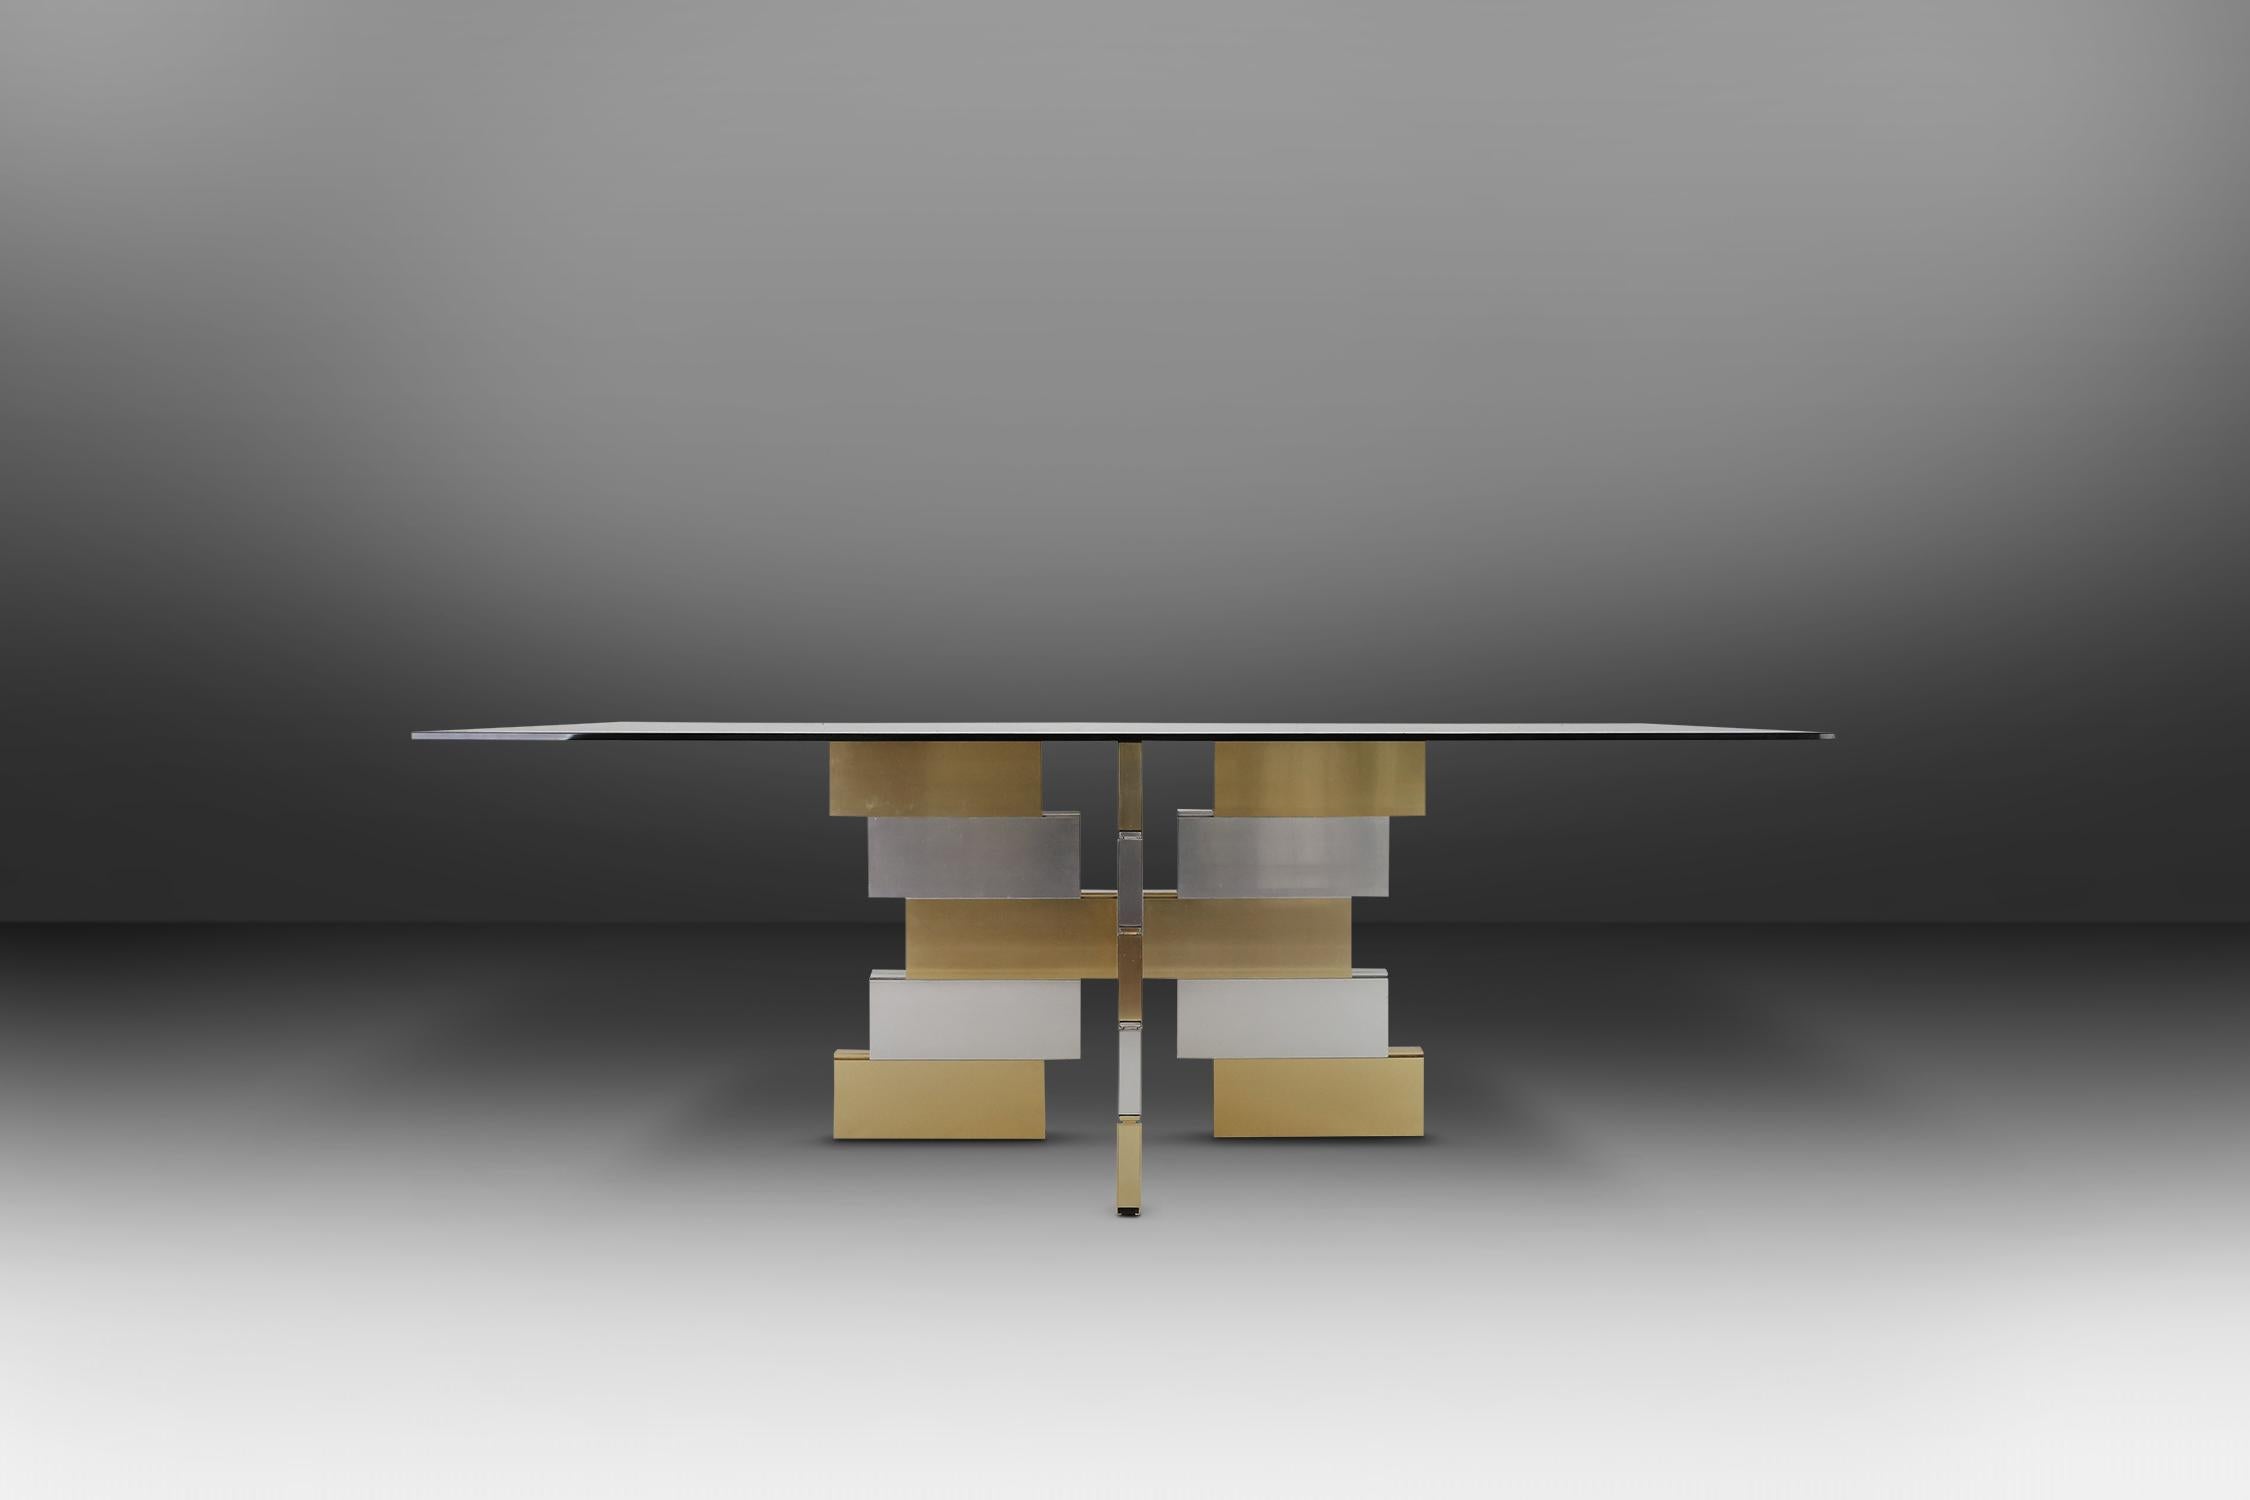 Dining table in the manner of Paul Evans. Made of anodized aluminum base that can move separately so that you can put the table in different setups. With a glass top you can see the table base.
Has some small user damage as you can see on the